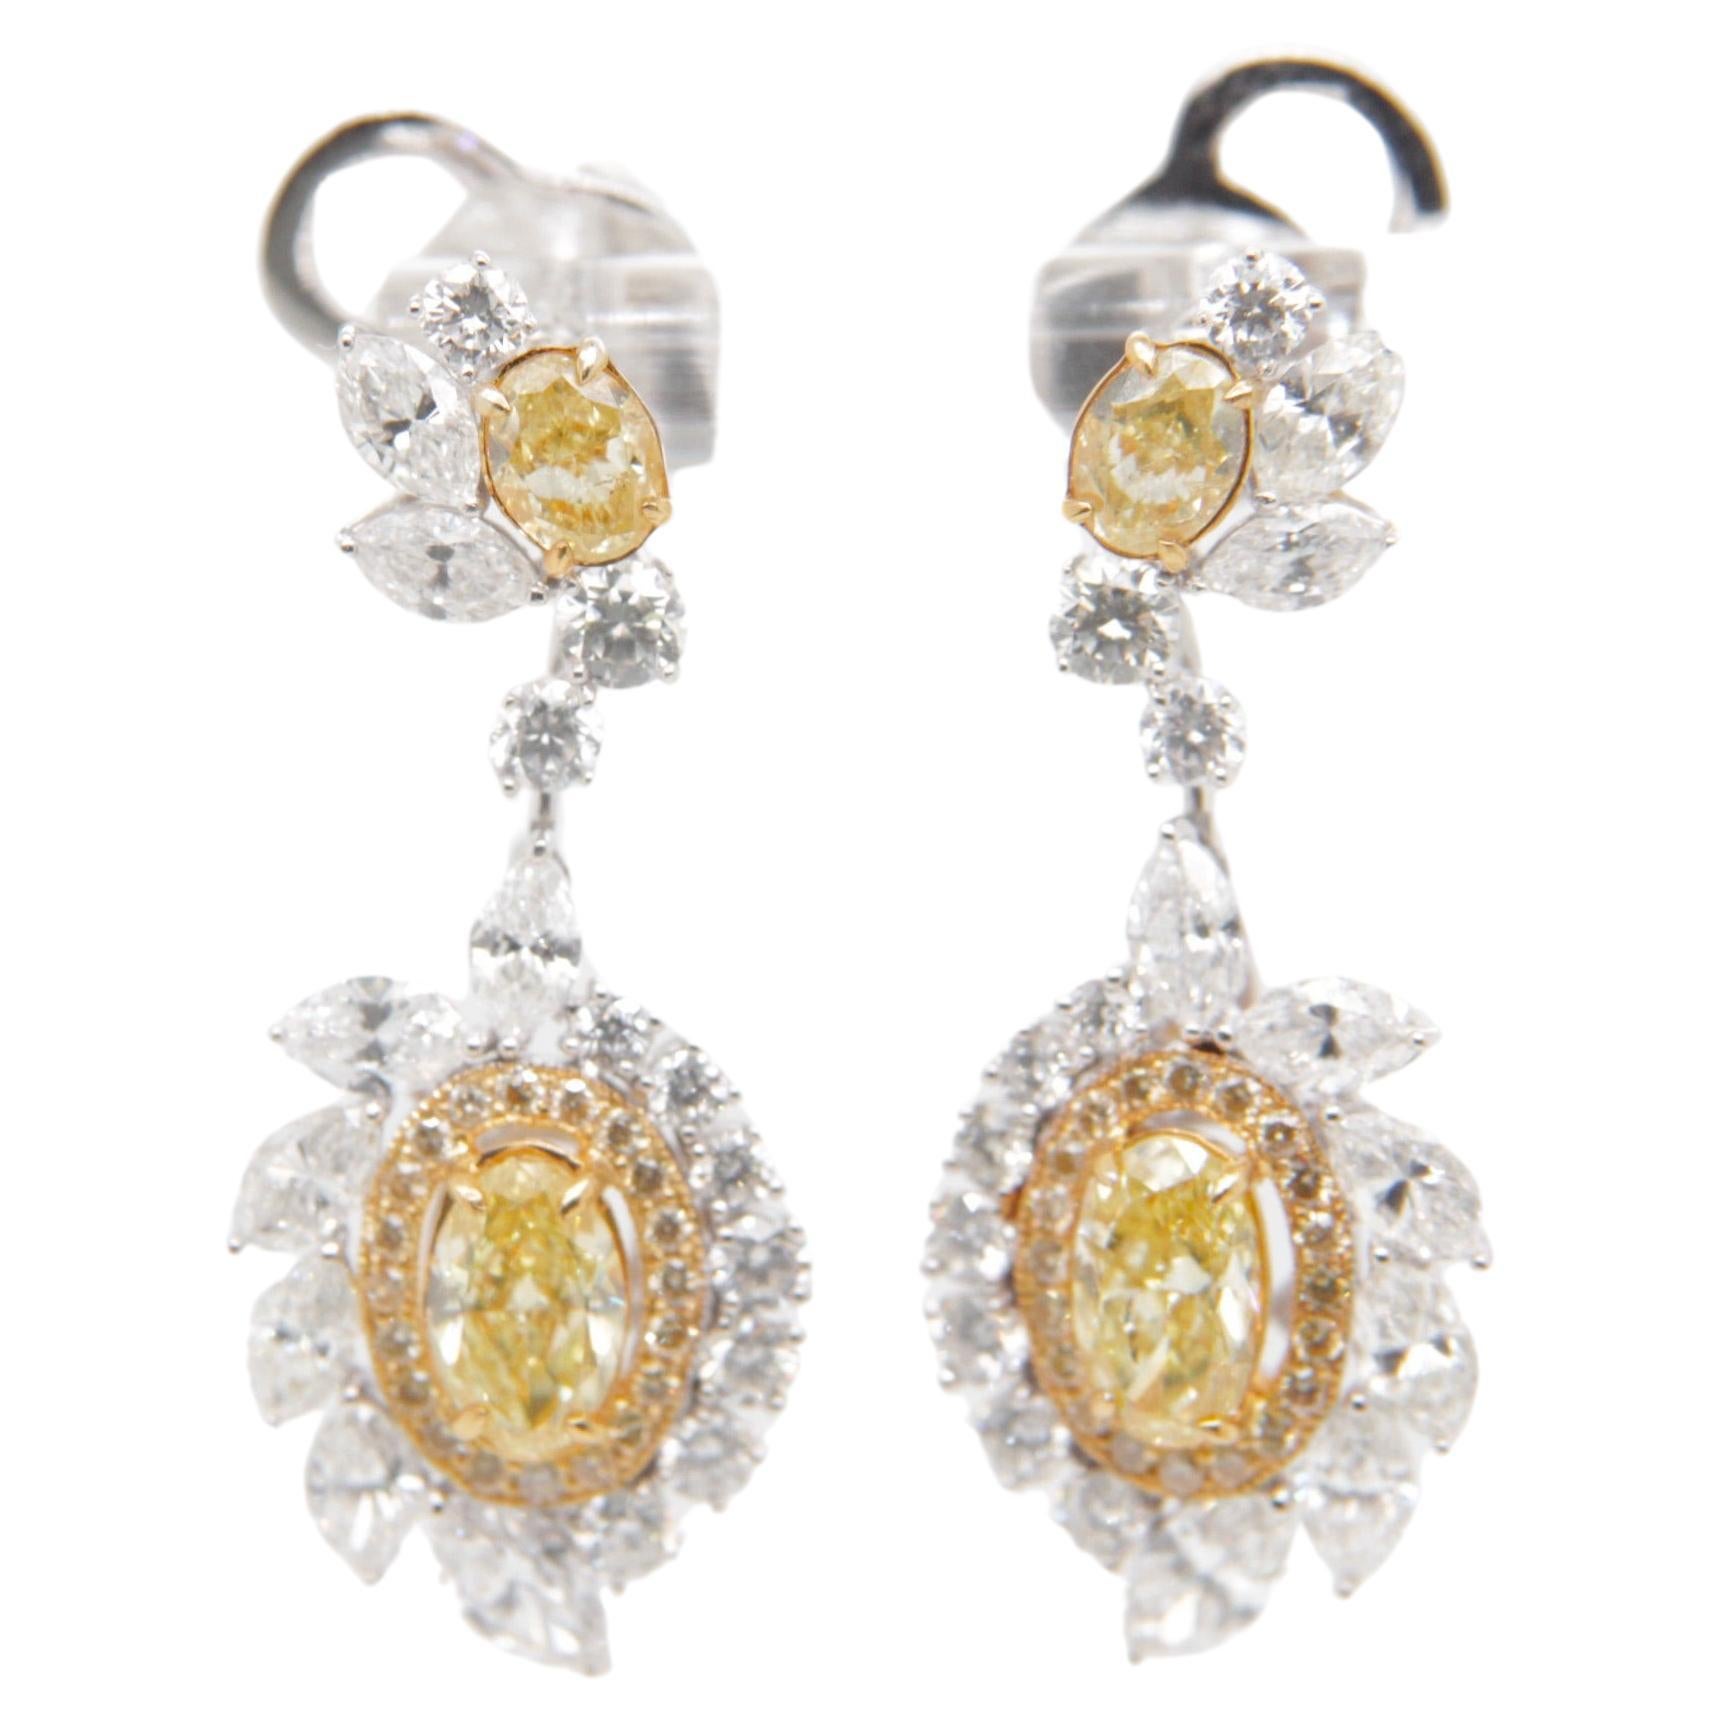 GIA Certified 1.21 Carat Fancy Intense Yellow Diamond & Marquise Floral Earrings For Sale